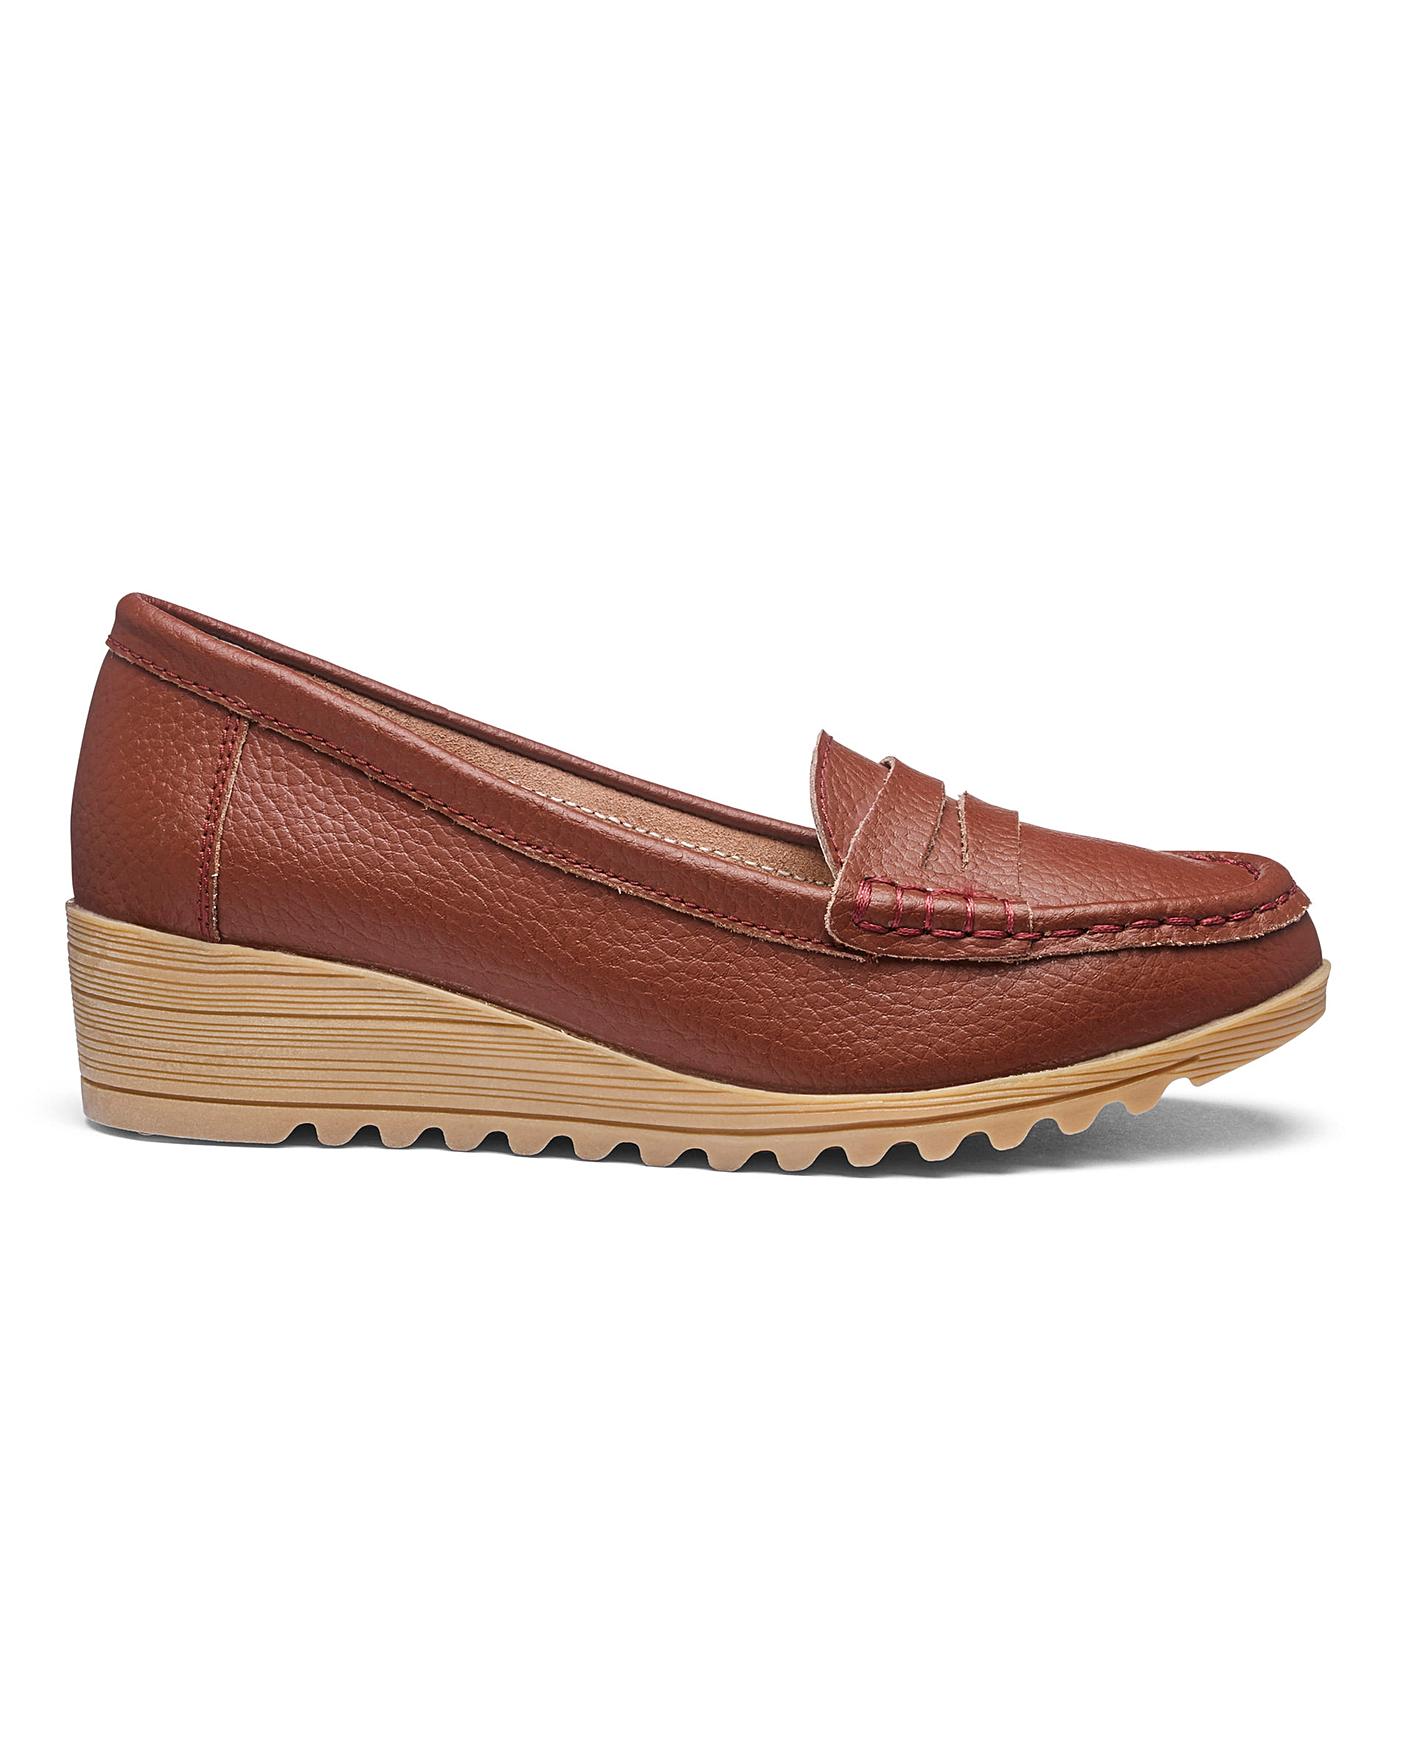 Leather Wedge Loafer Shoes EEE Fit | Fashion World